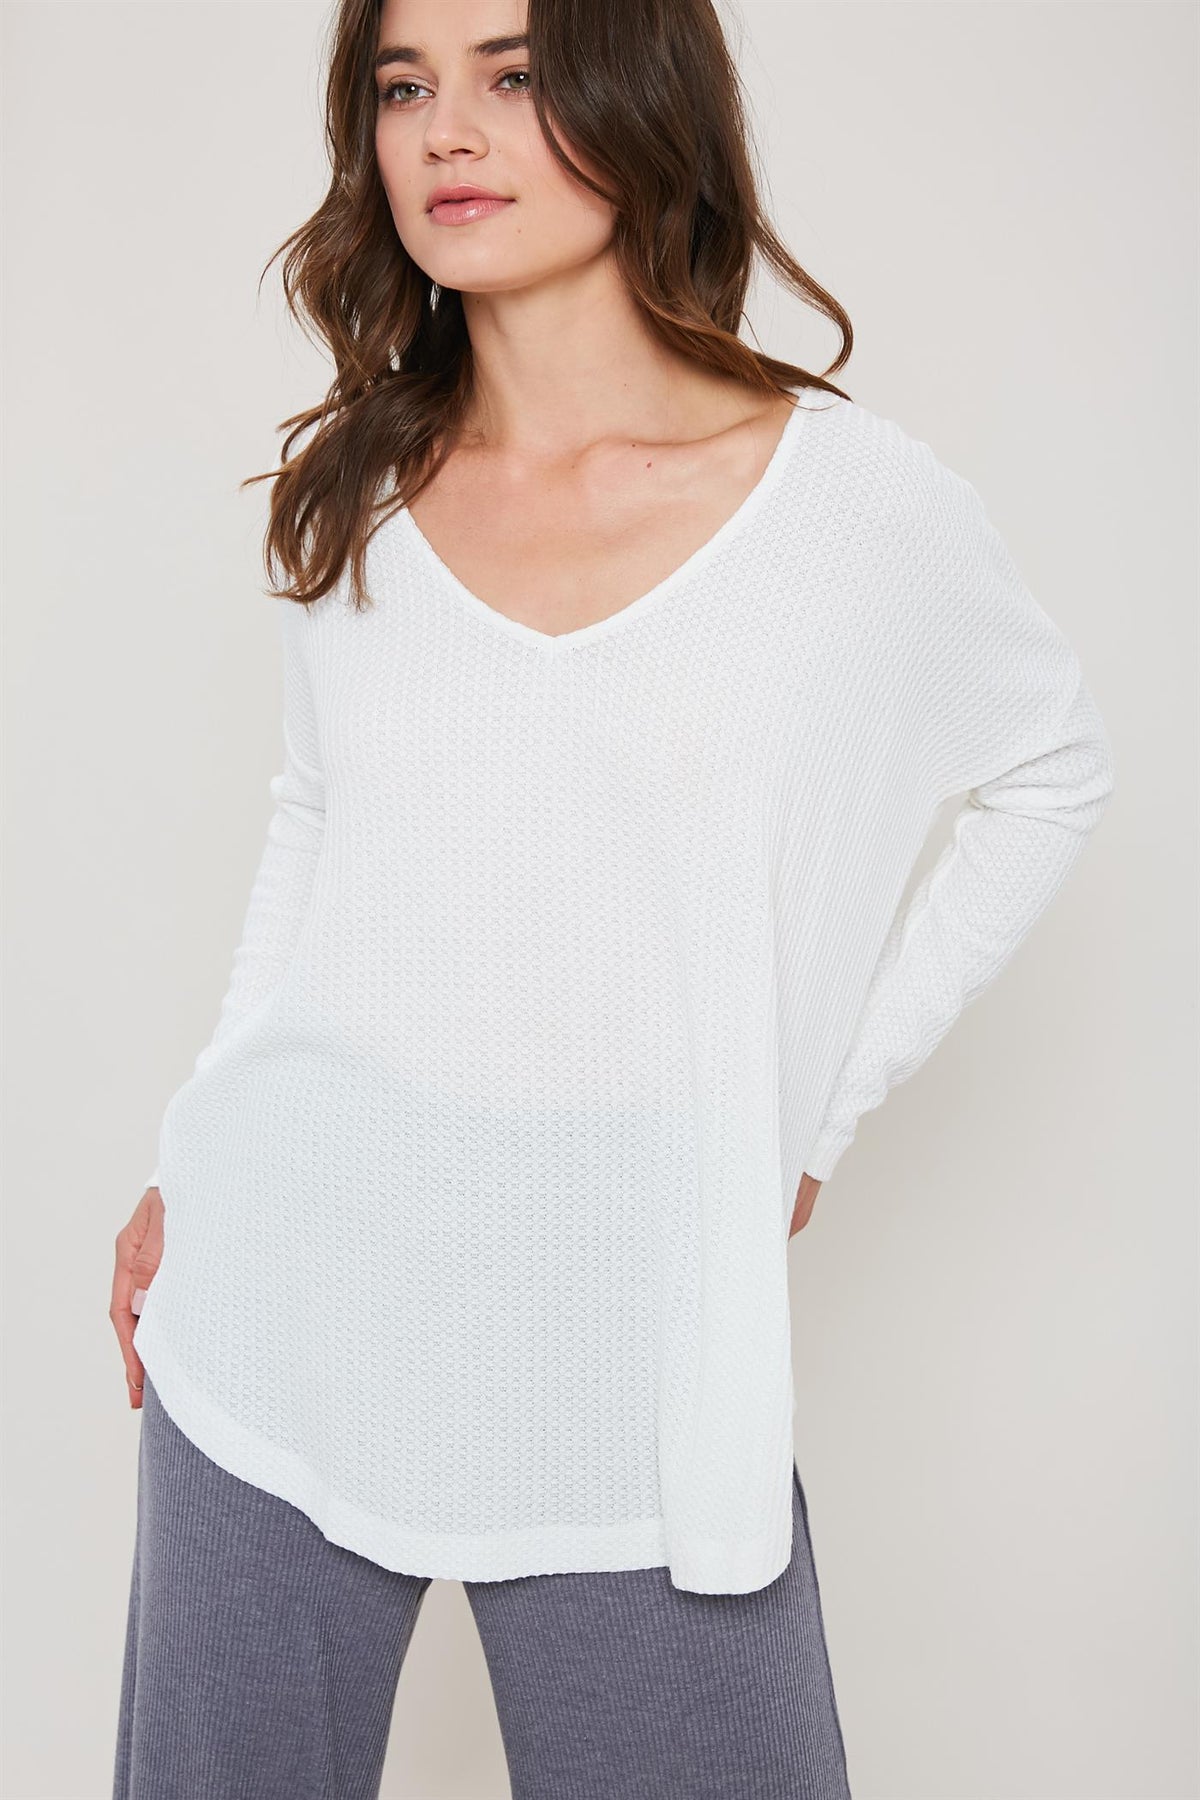 Choose Cozy Waffle Top - Ivory